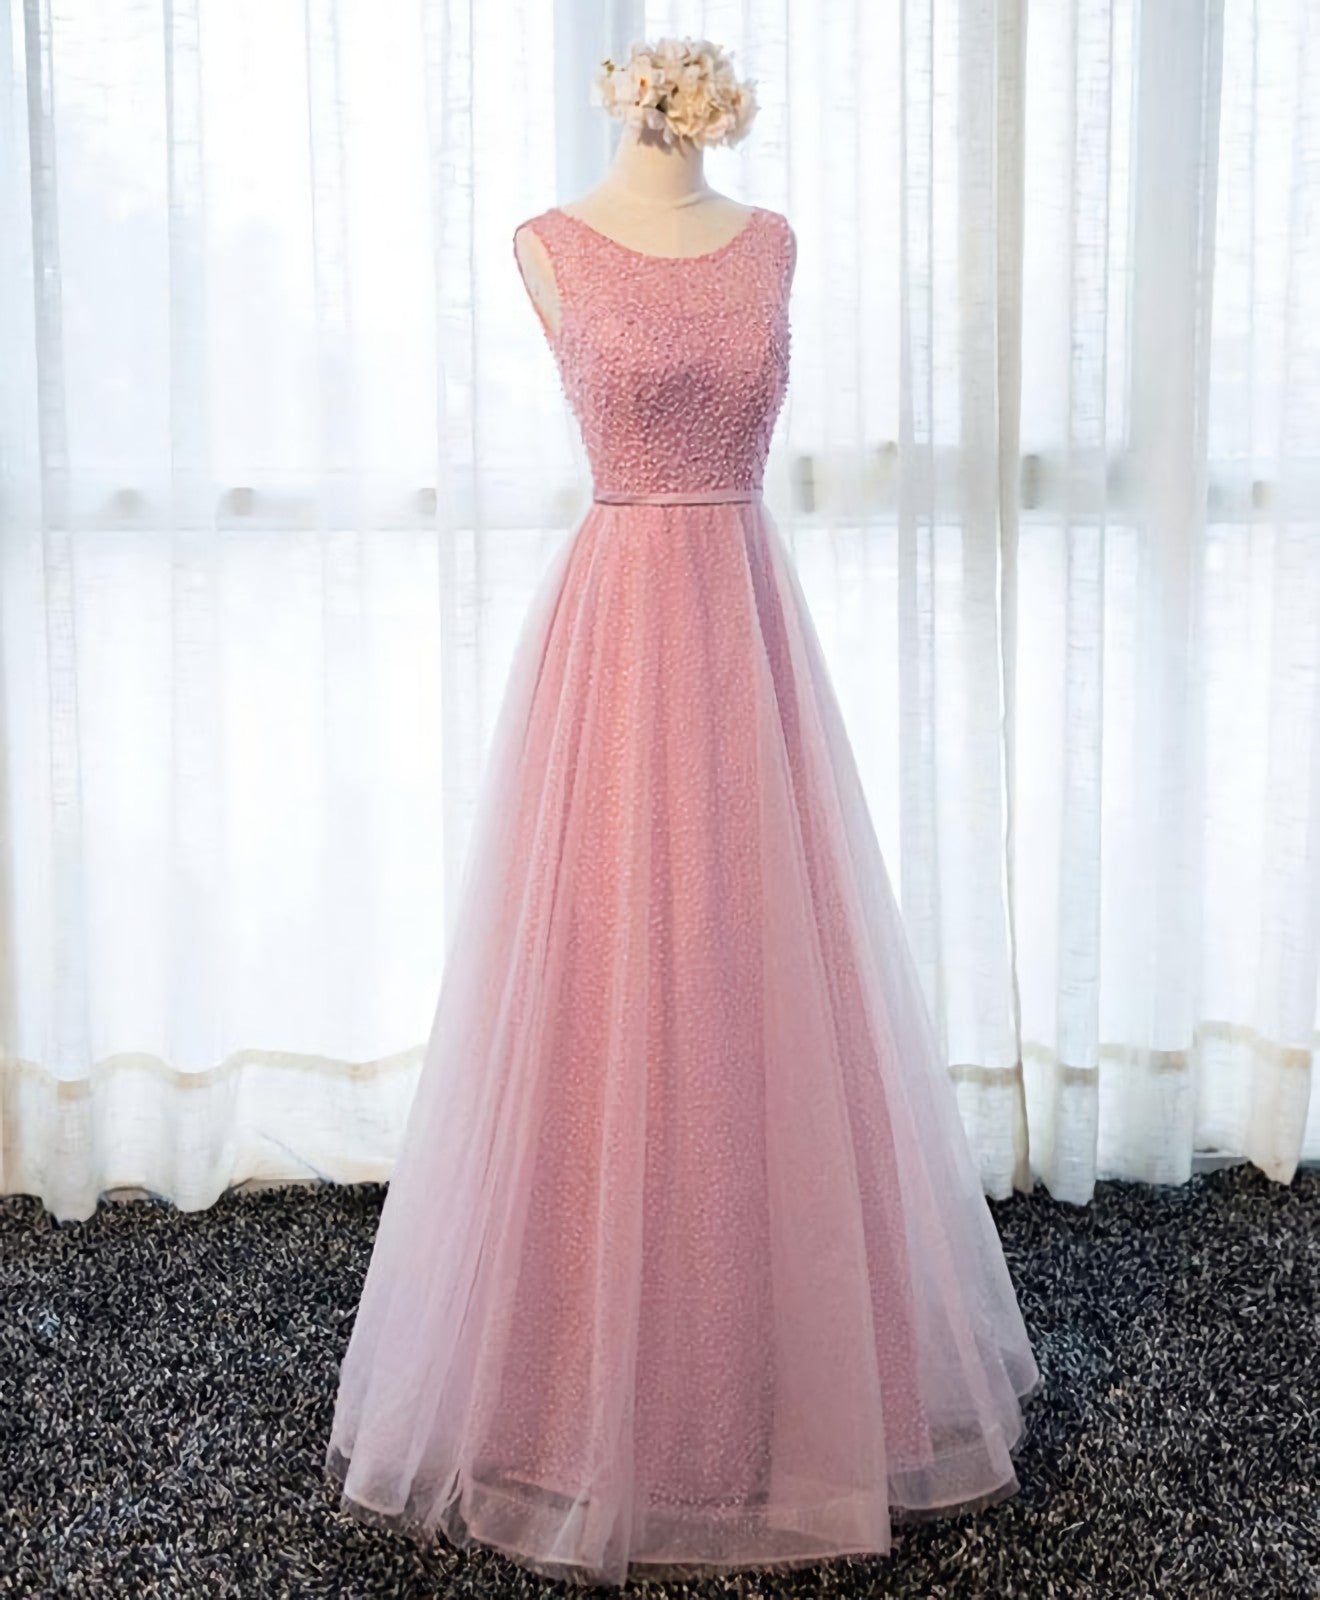 Fall Wedding Color, A Line Round Neck Tulle Long Prom Dress, Lace Evening Dress